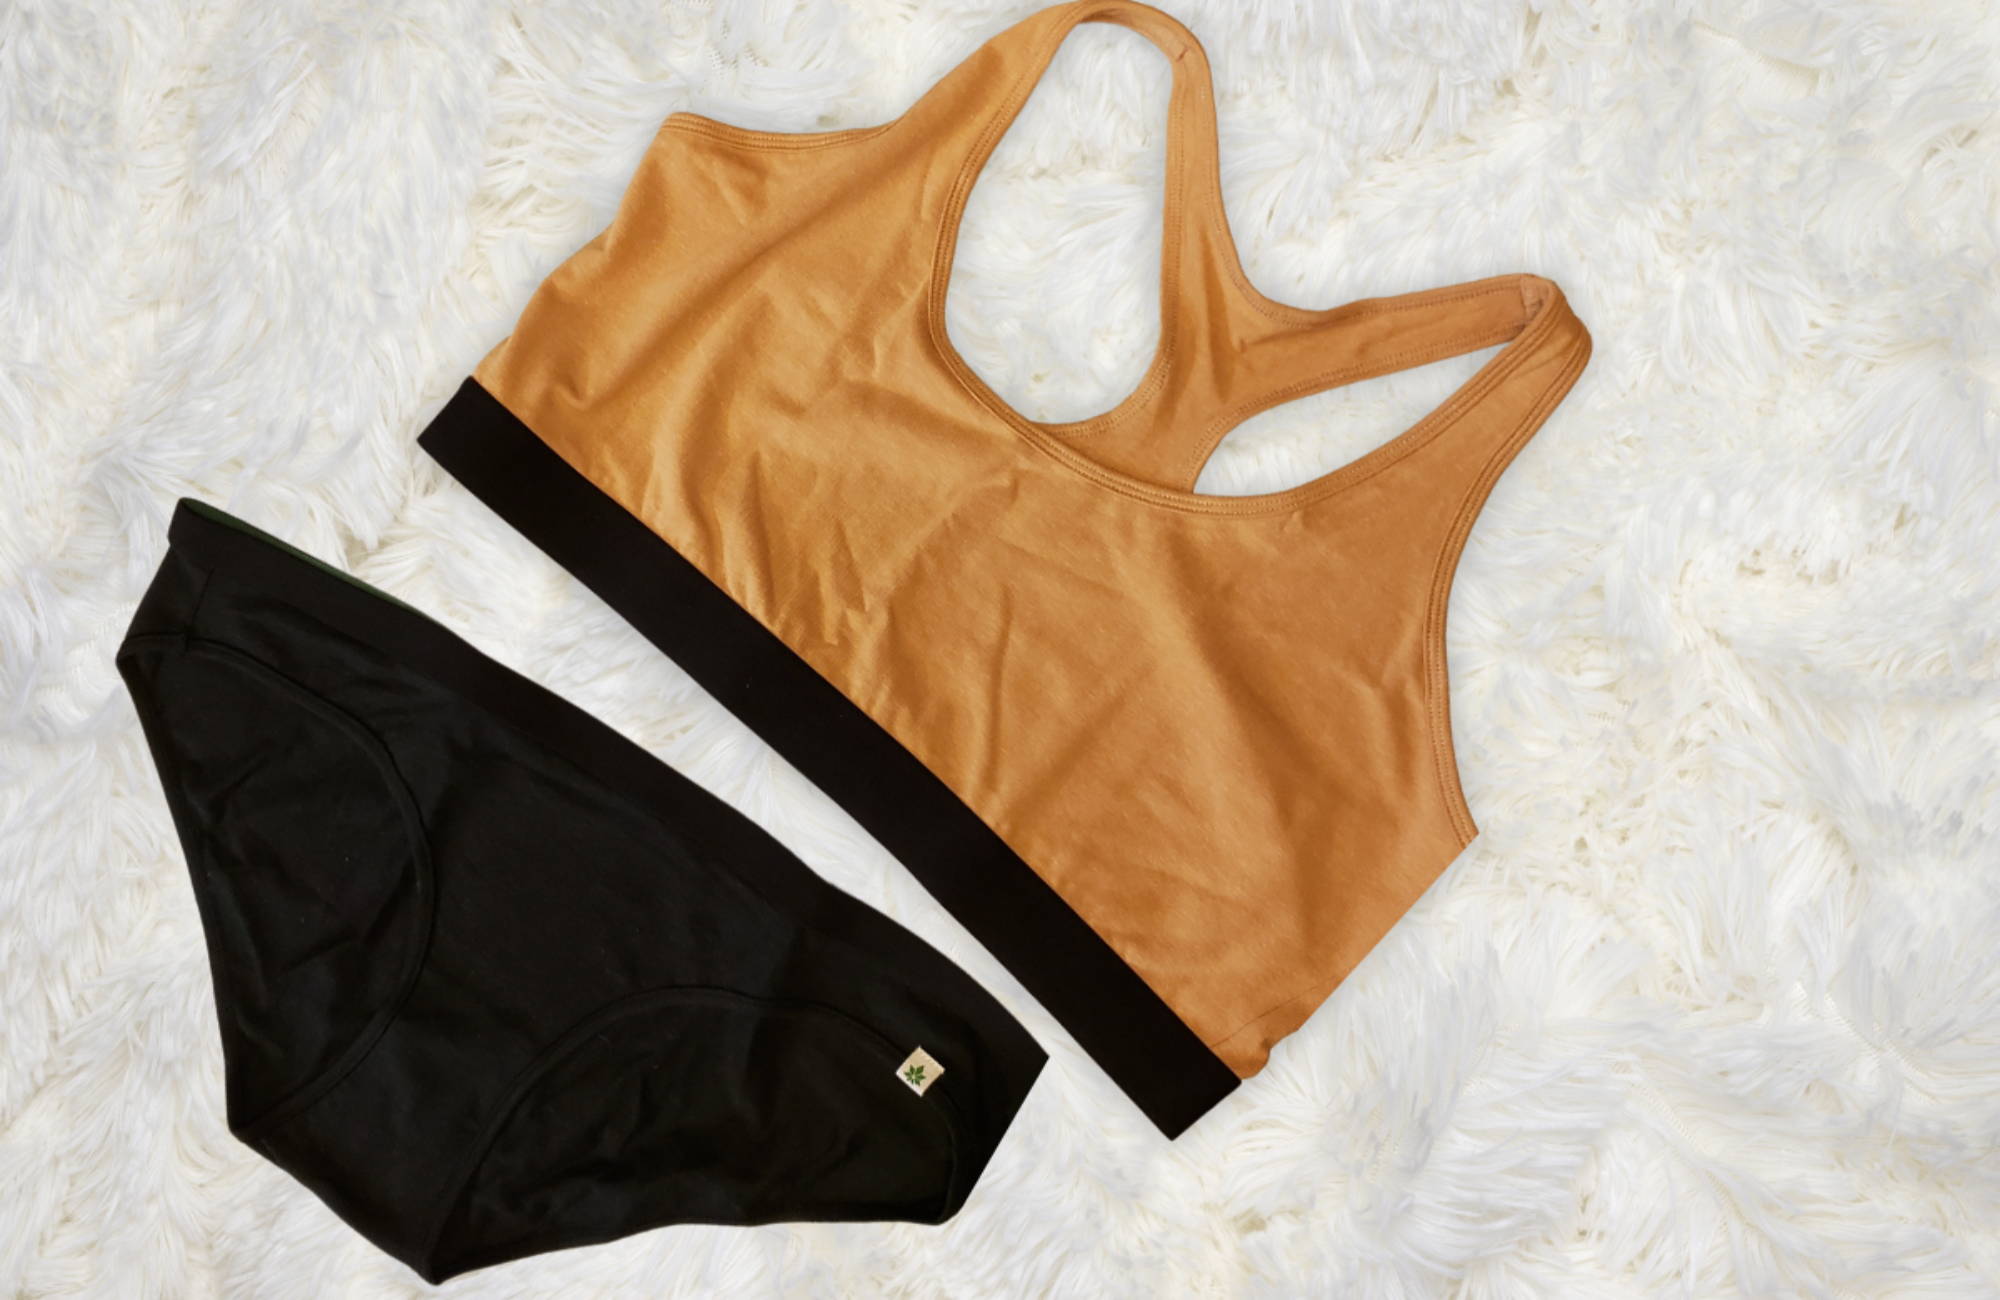 bikini underwear in black laid out flat with a light orange racerback bralette against a fuzzy white background